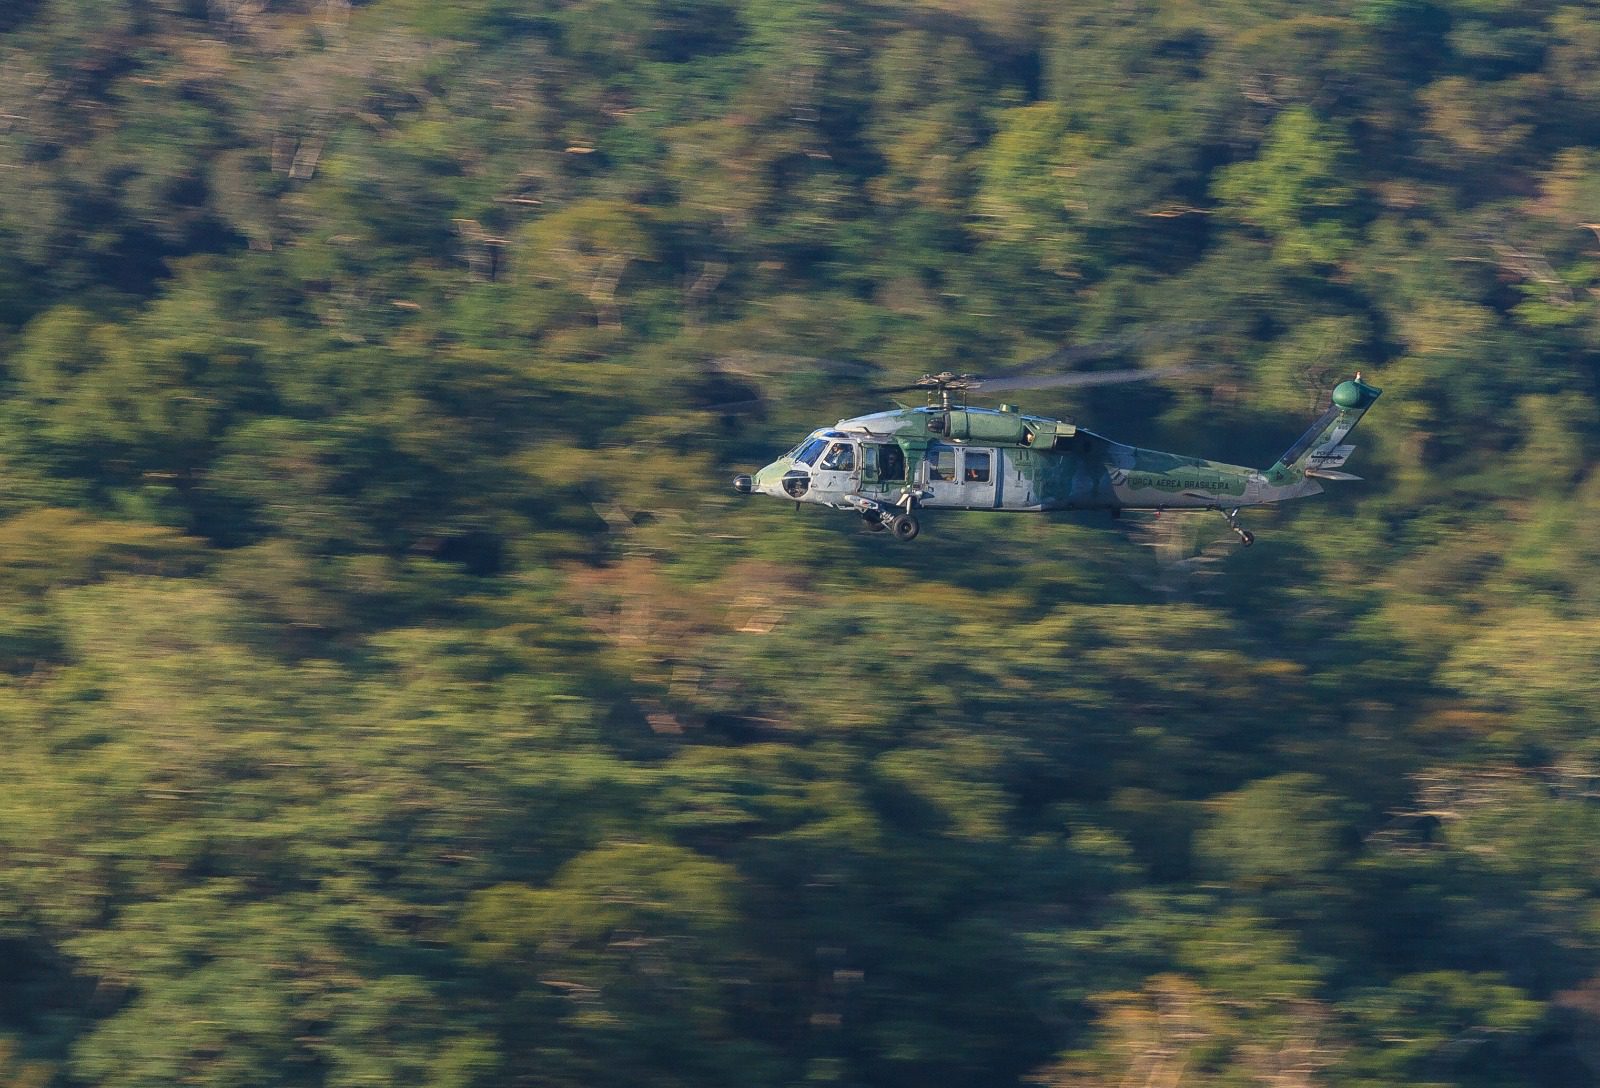 Operation Yanomami Shield is reinforced by Brazilian Armed Forces helicopters